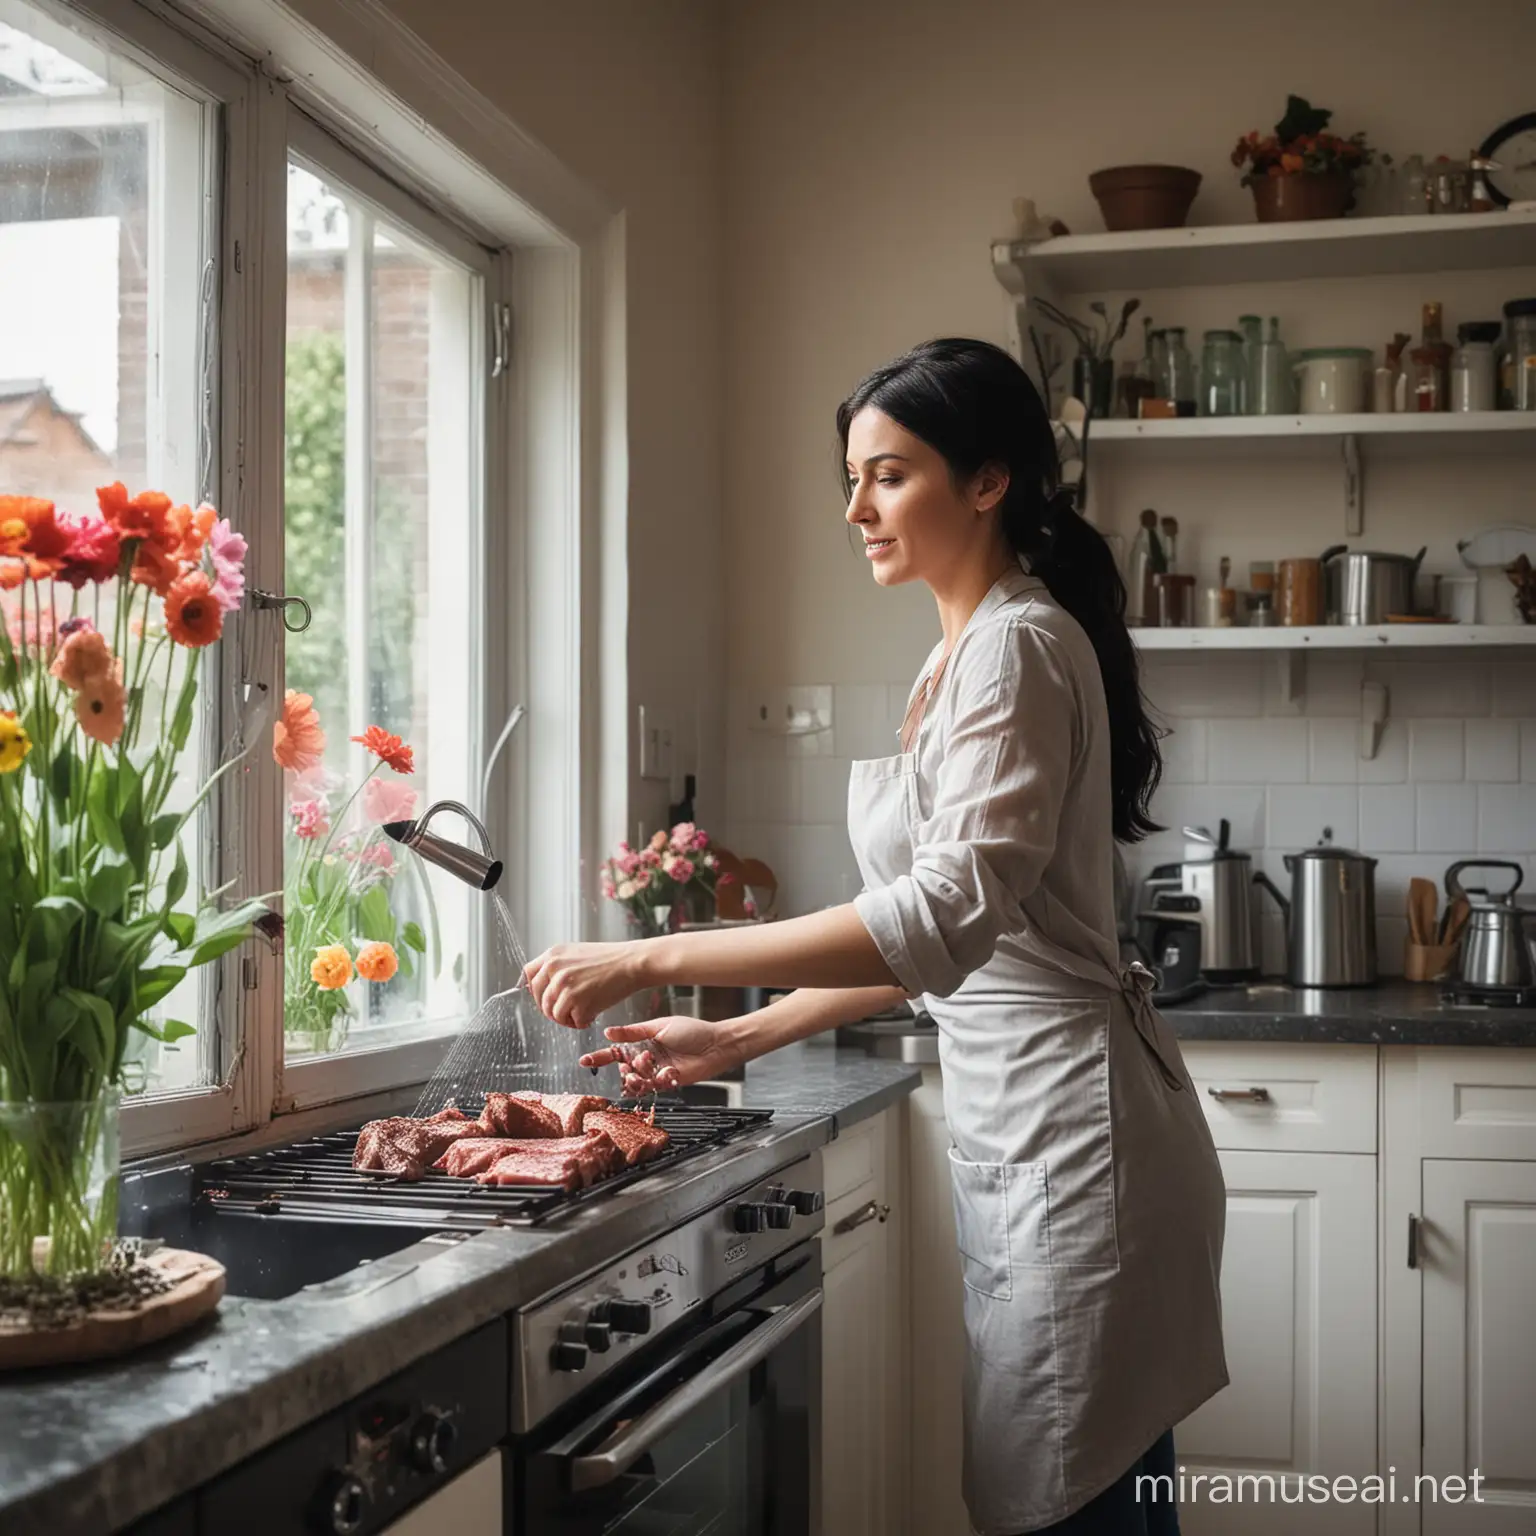 Multitasking Cooking Meat and Watering Flowers in Kitchen